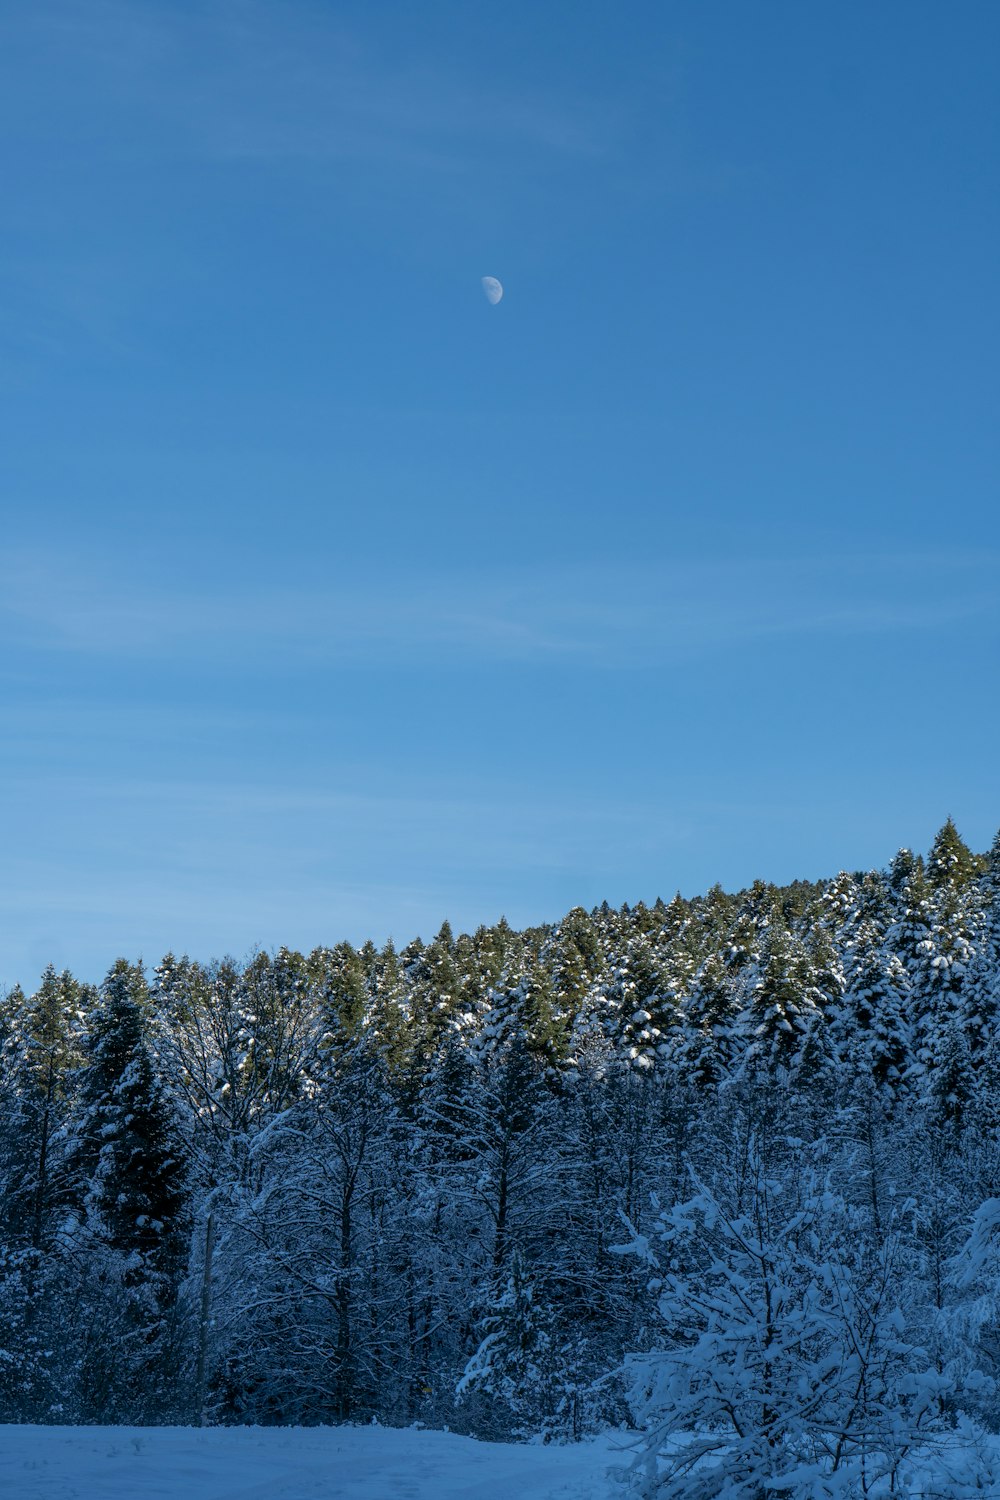 a snowy field with trees and a moon in the sky